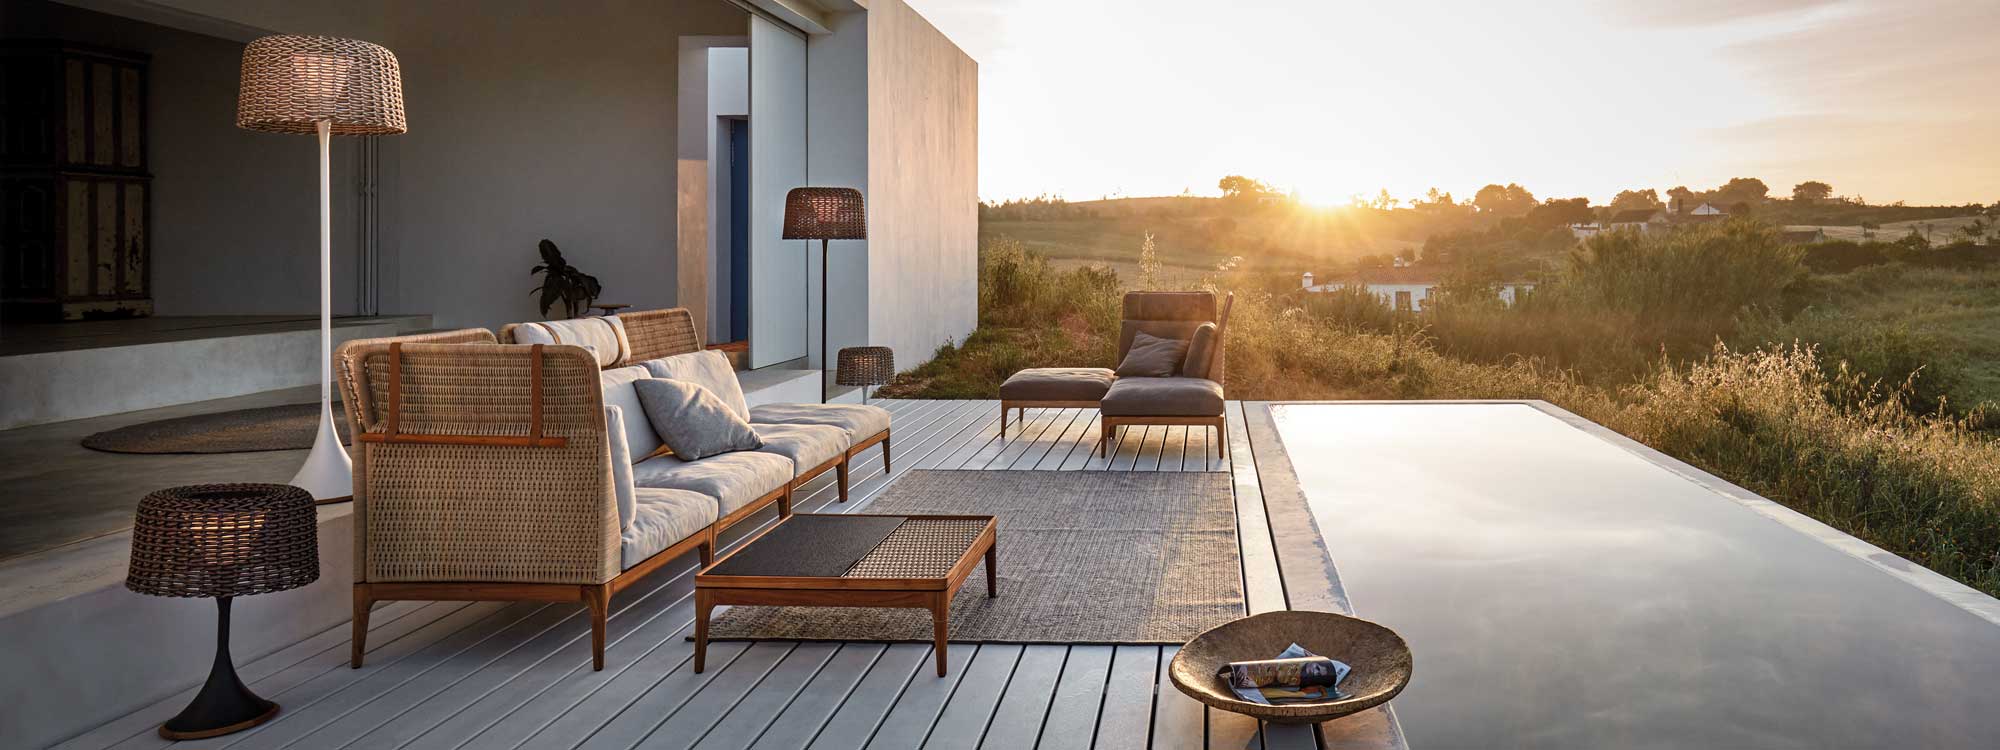 Image at dusk of Gloster Lima contemporary wicker garden sofa and Mesh garden lights